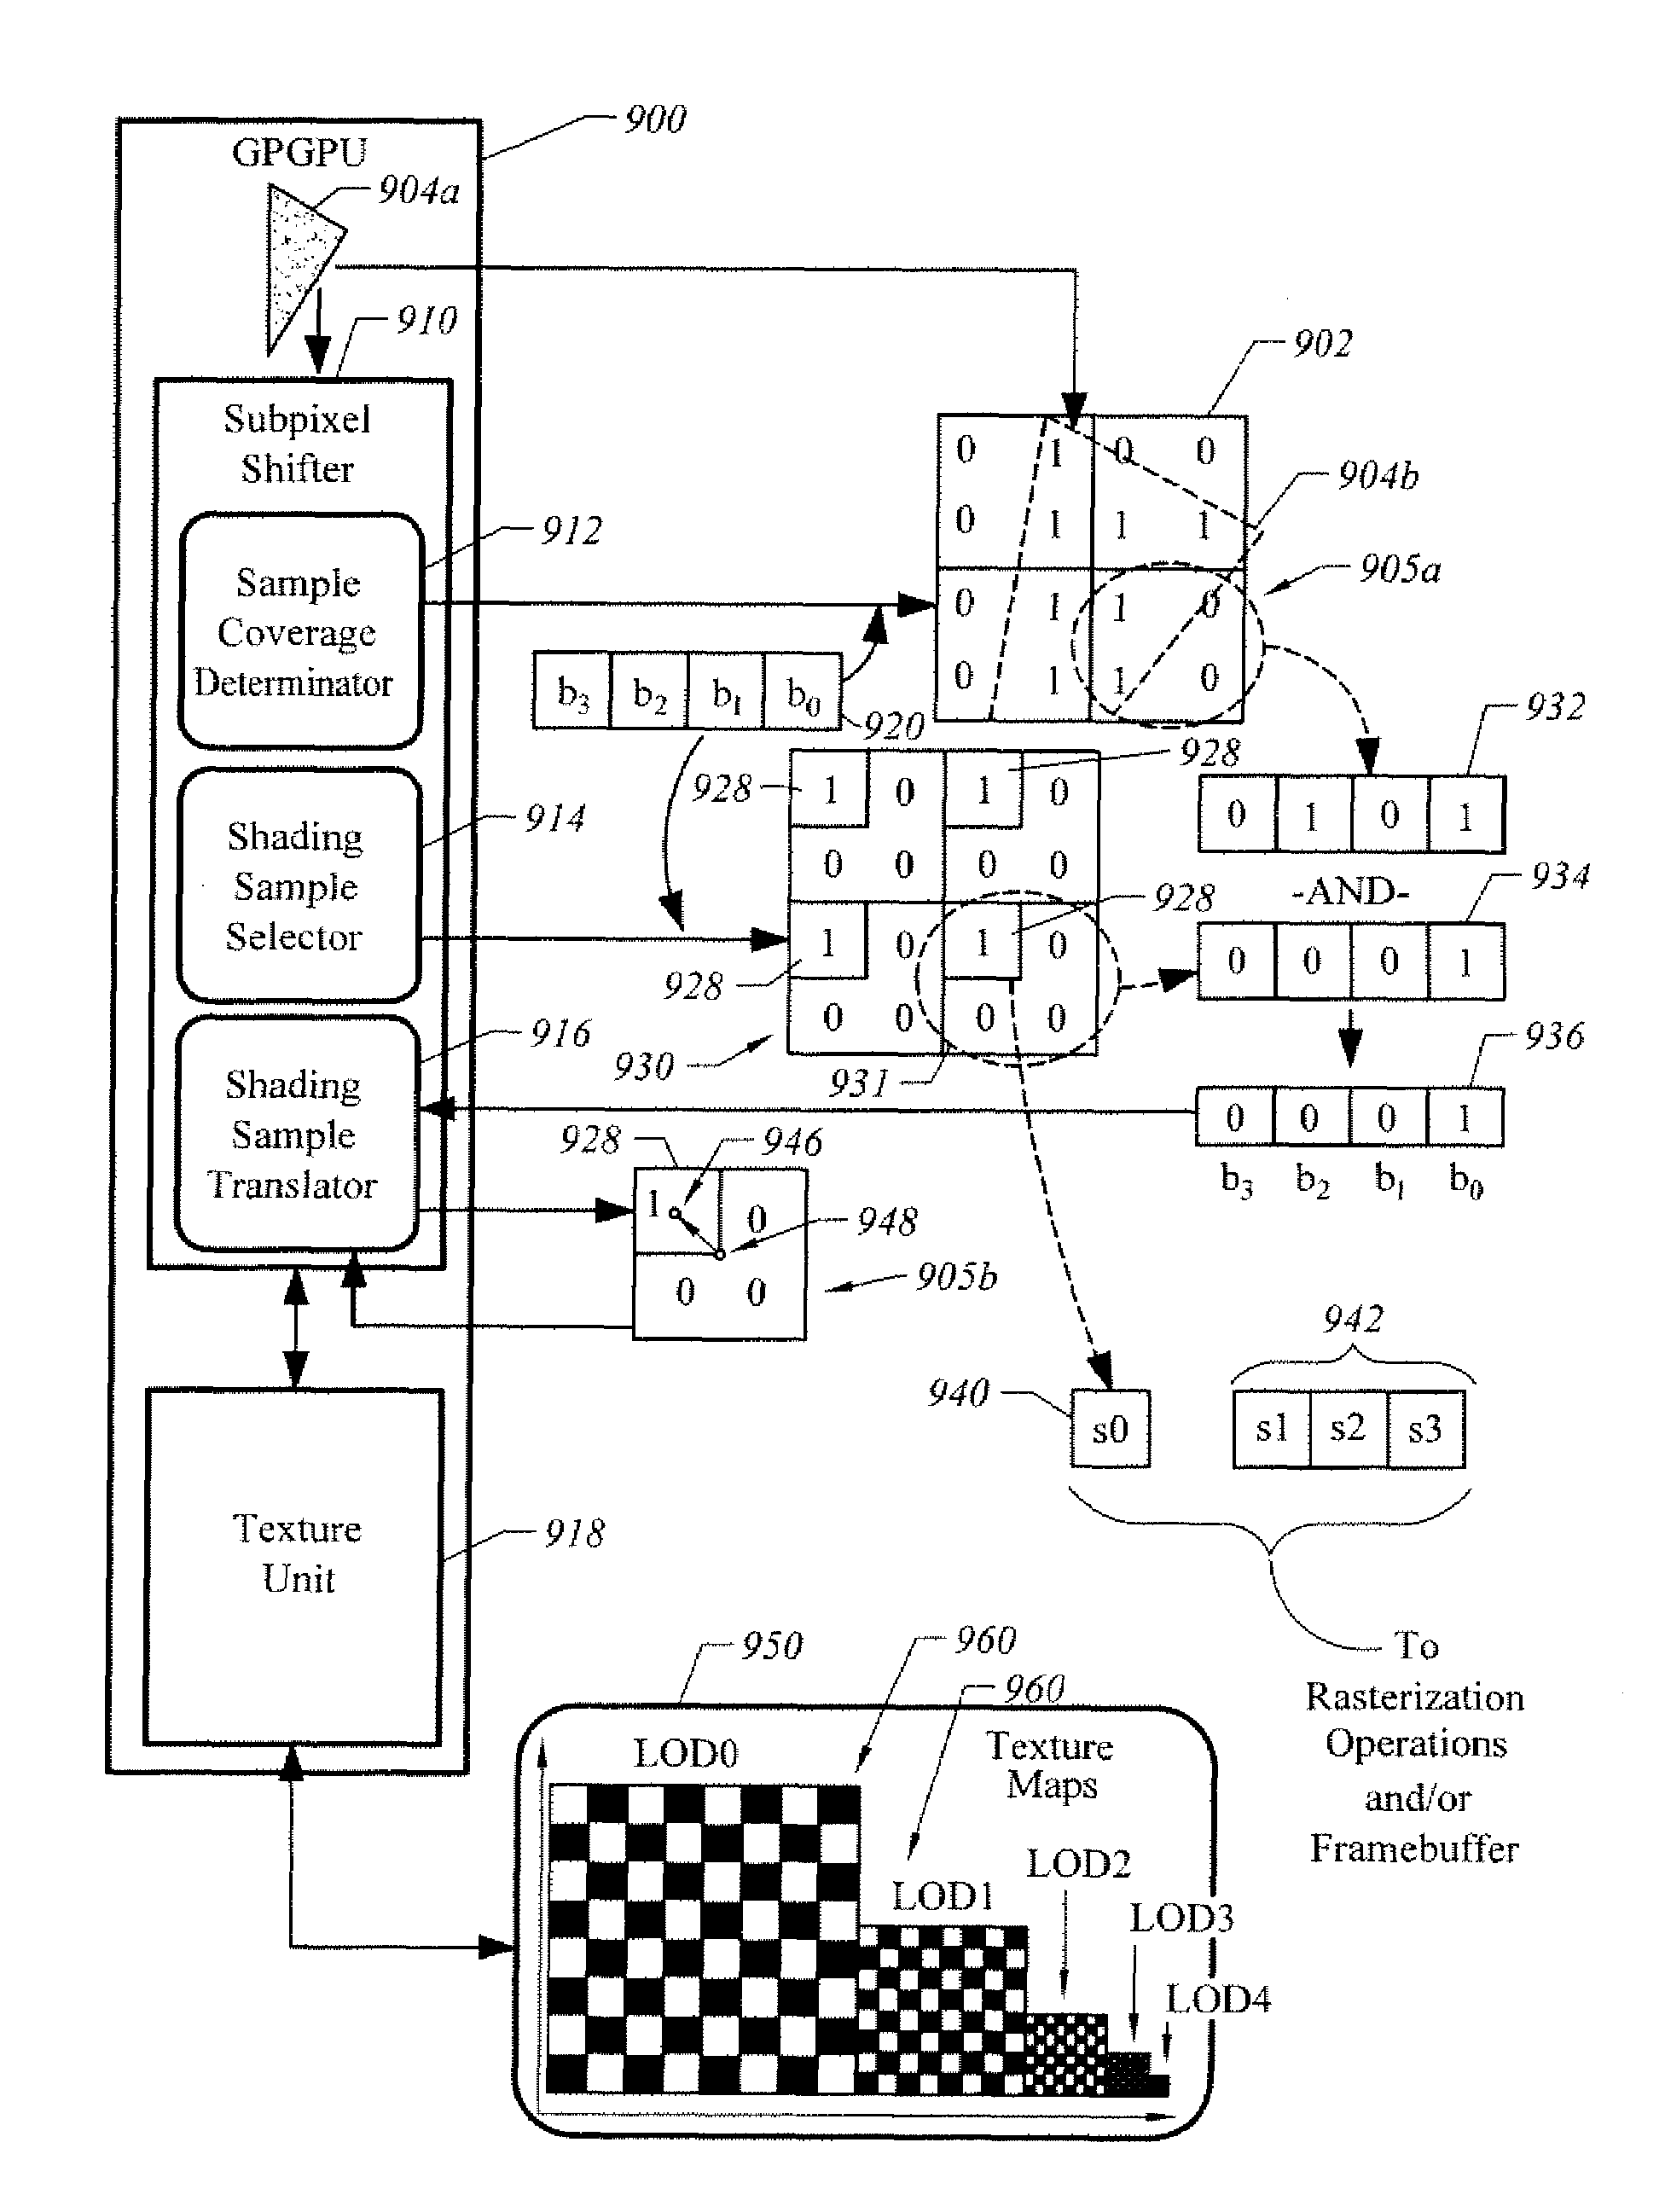 Graphical processing system, graphical pipeline and method for implementing subpixel shifting to anti-alias texture